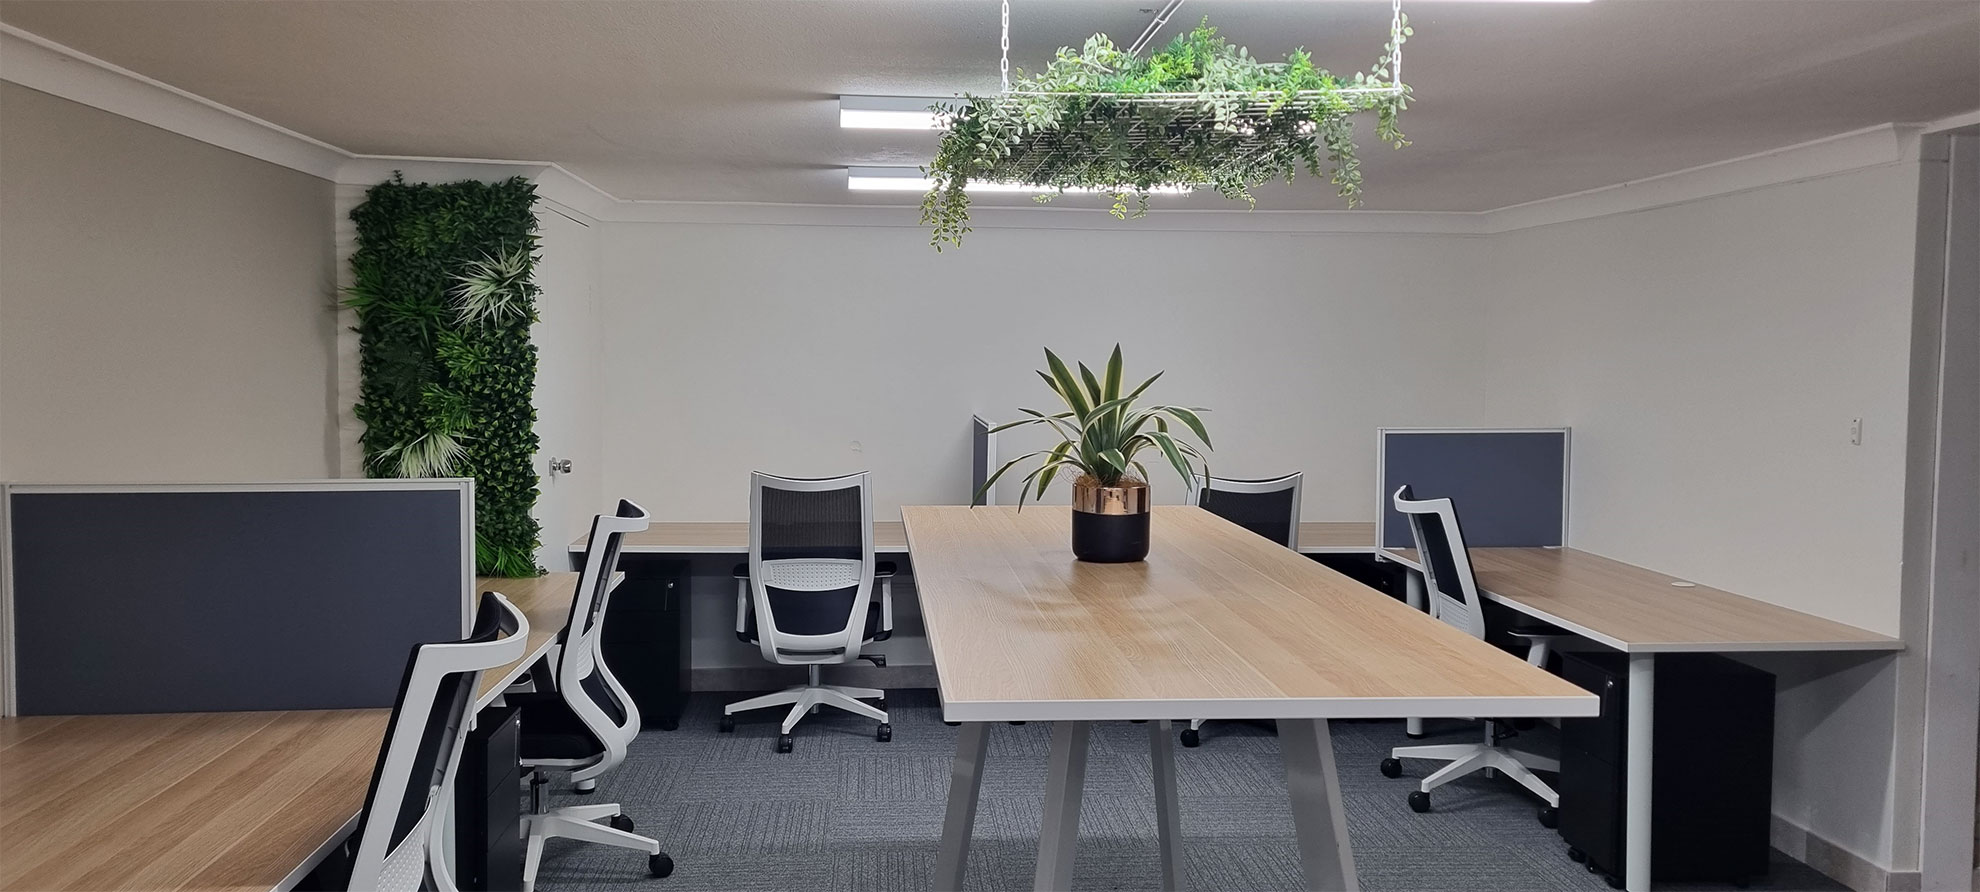 The Benefits of Using a Green Wall in an Office